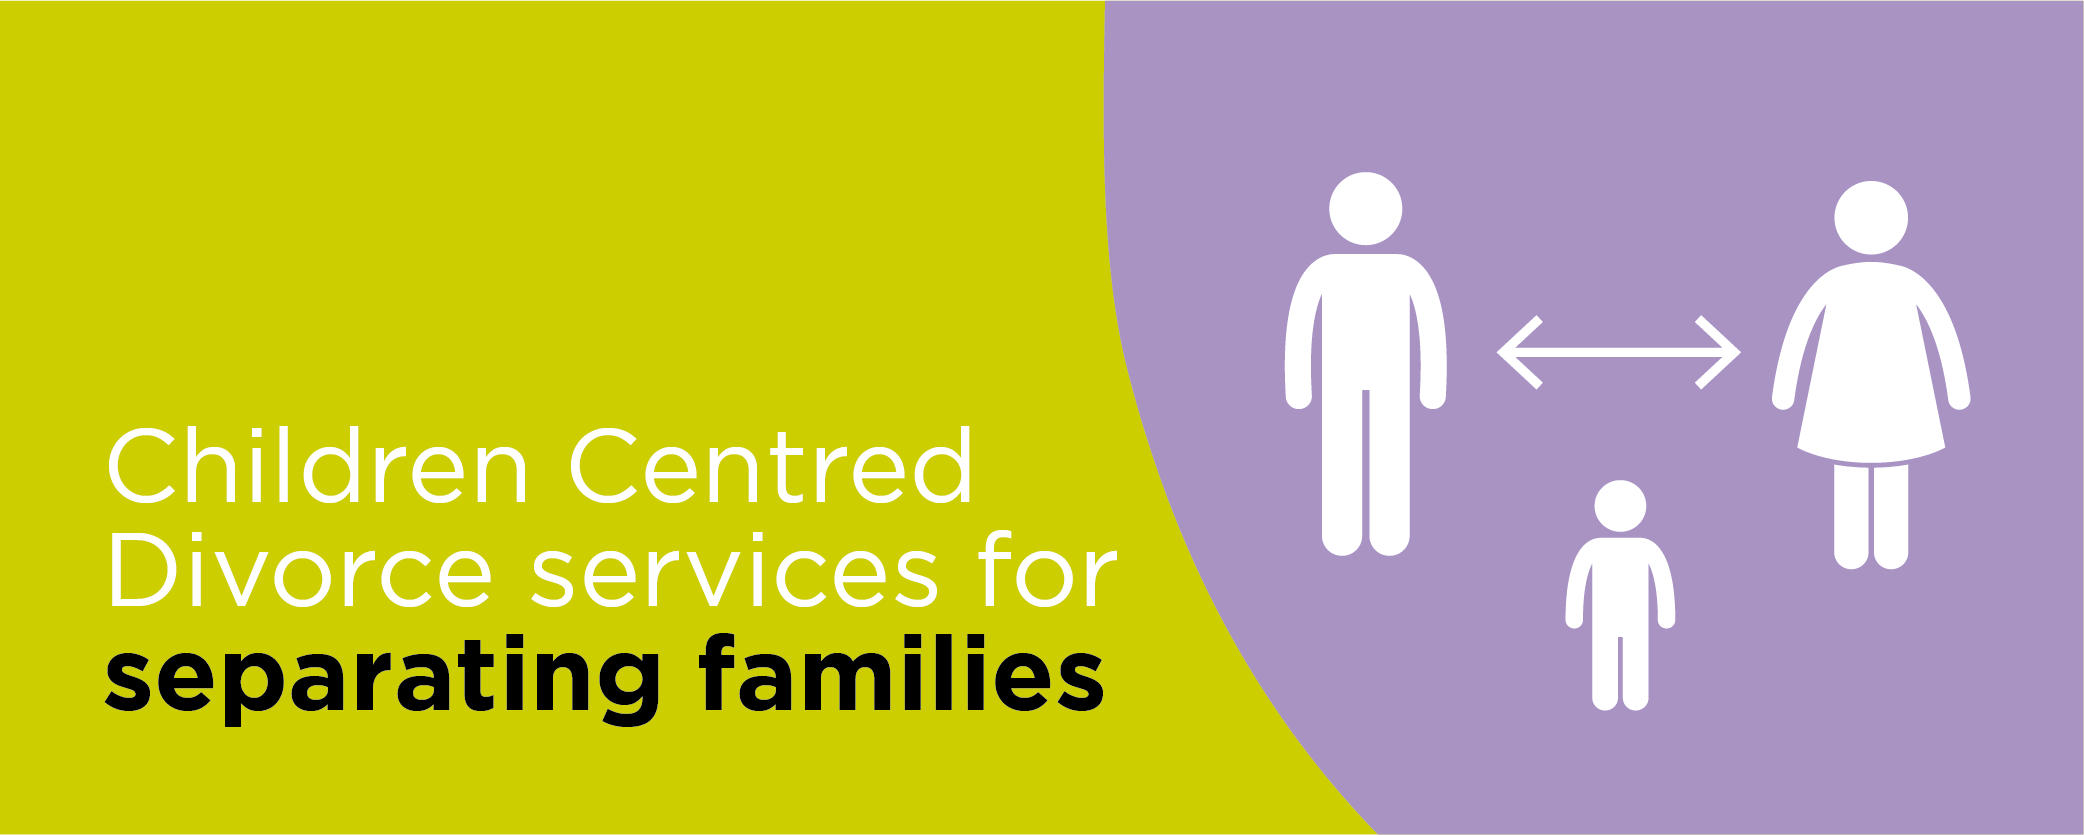 Children Centred Divorce services for separating families